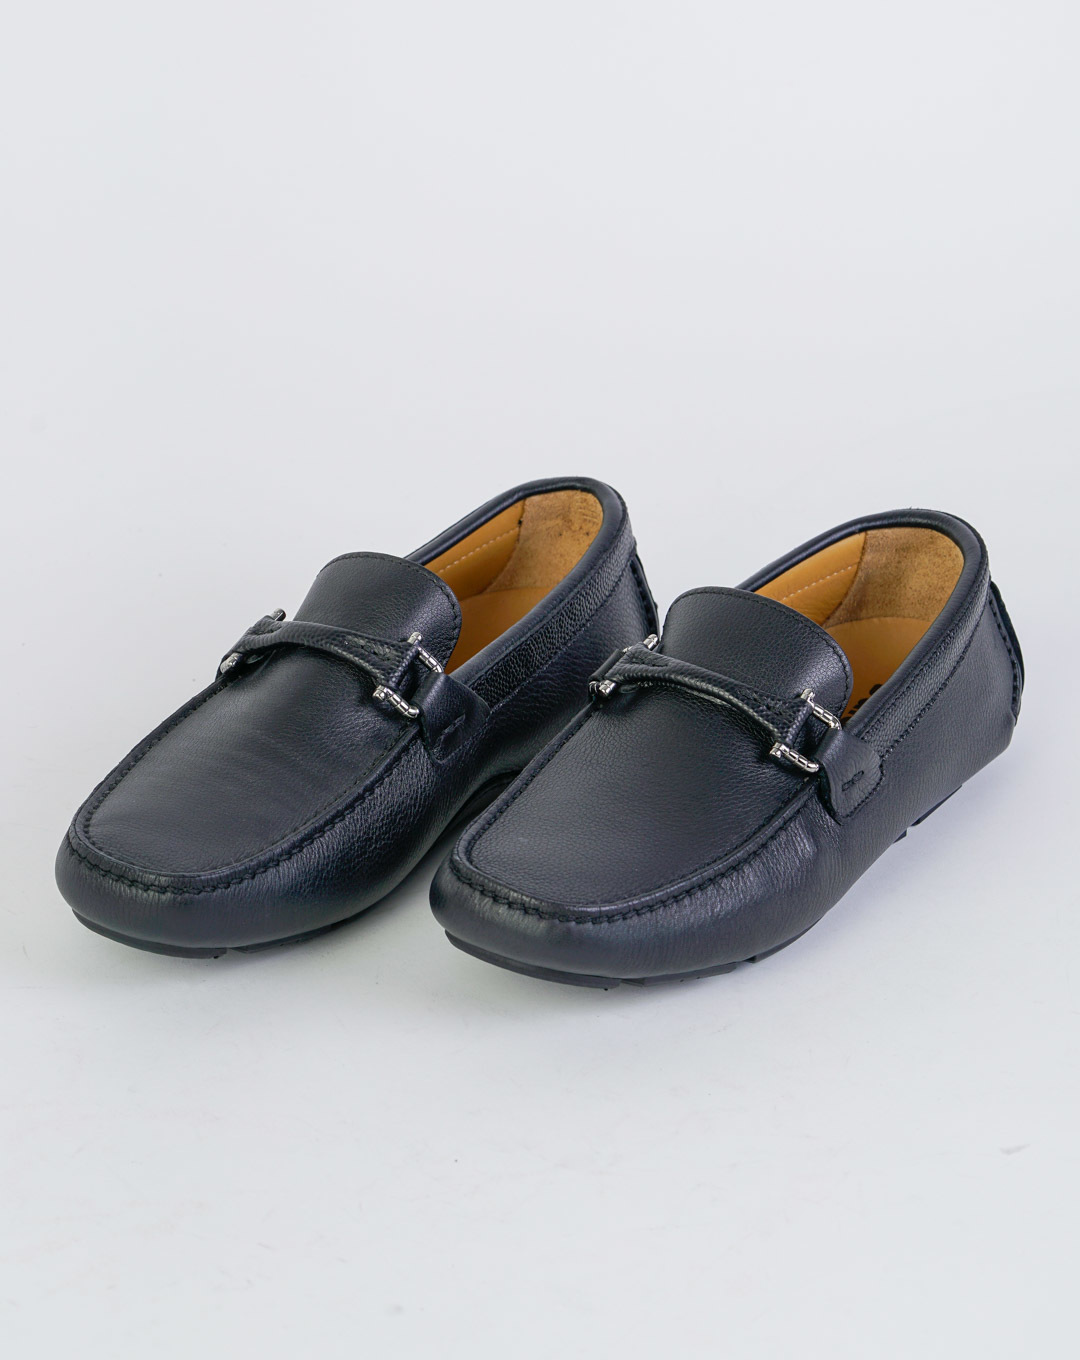 nappa leather loafers